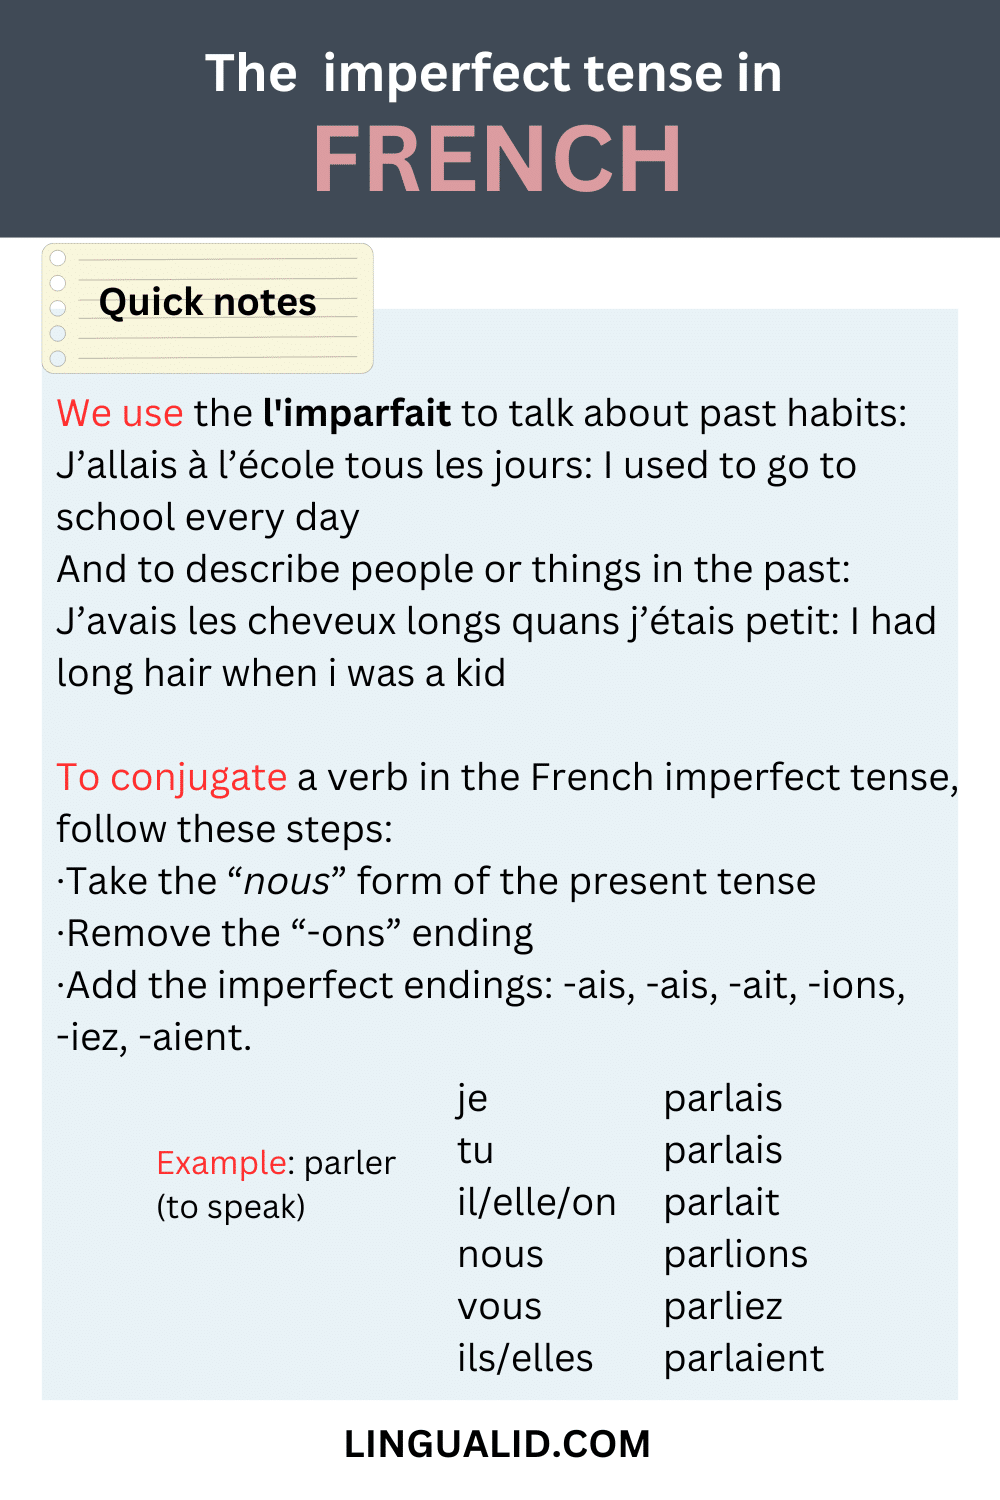 THE IMPERFECT TENSE IN FRENCH L'IMPARFAIT visual